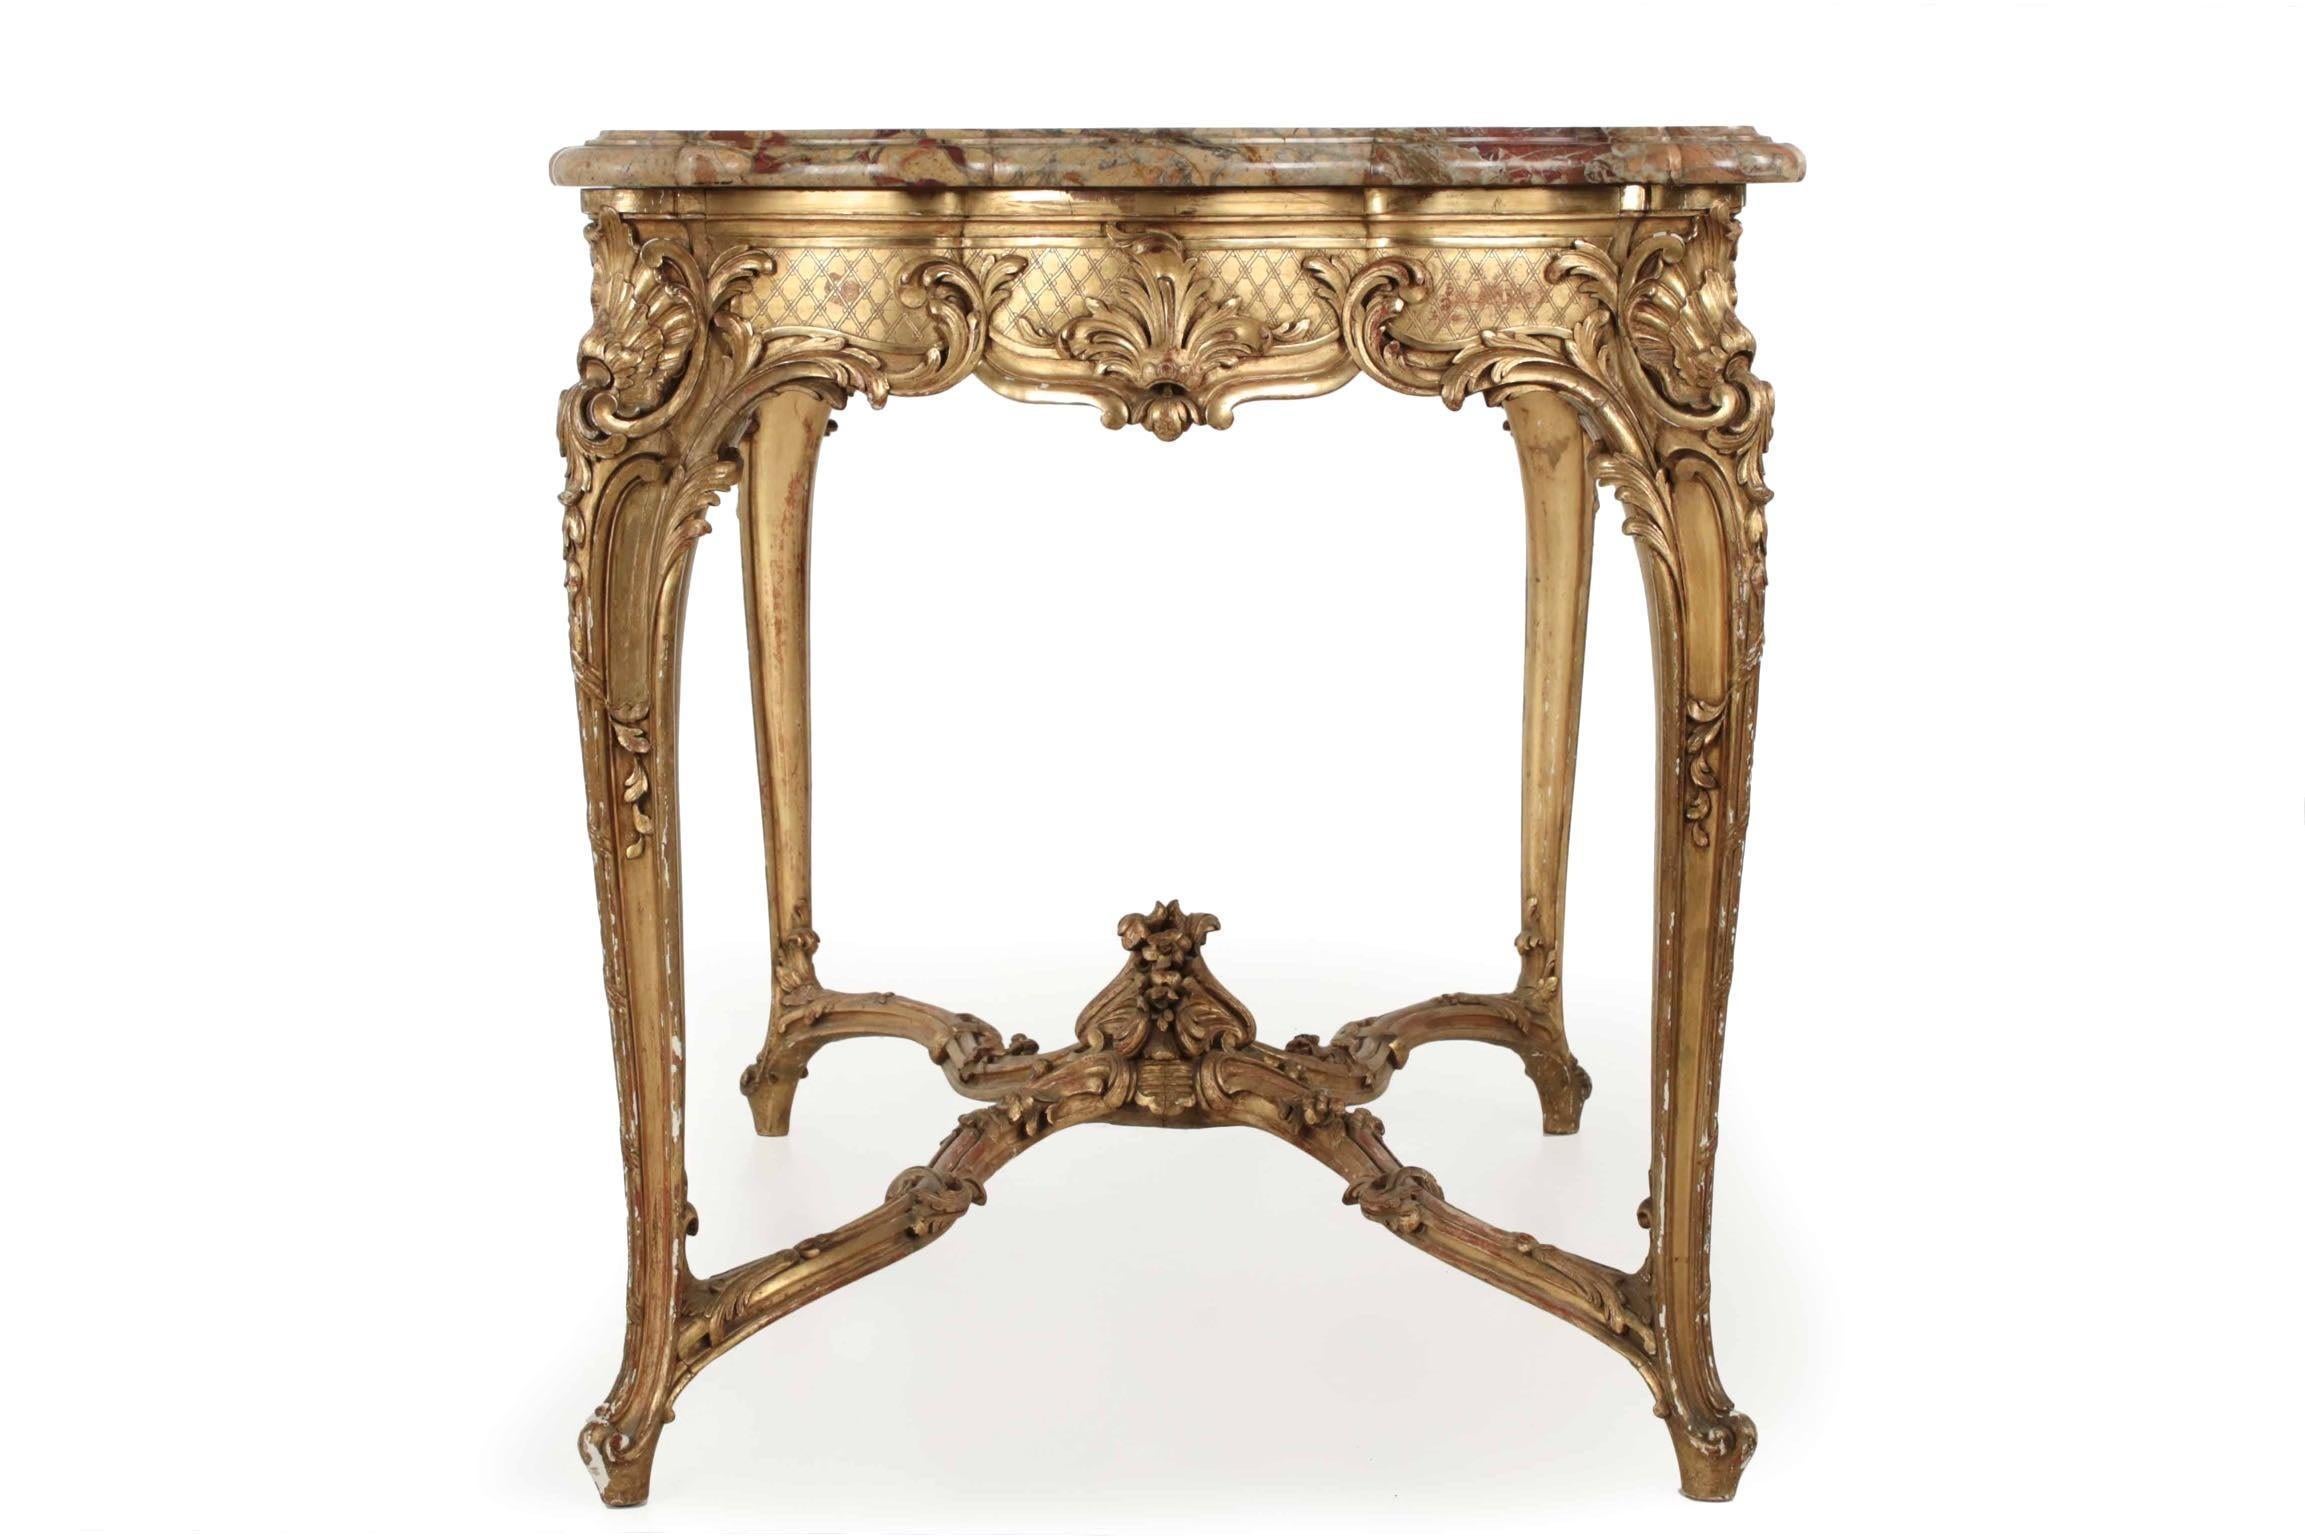 Of inordinately fine quality and presence, this exceptional Parisian center table is a powerful example of the exuberance for early designs during the Belle Époque. It is ceaselessly ornamented with a latticework ground and furls of acanthus with